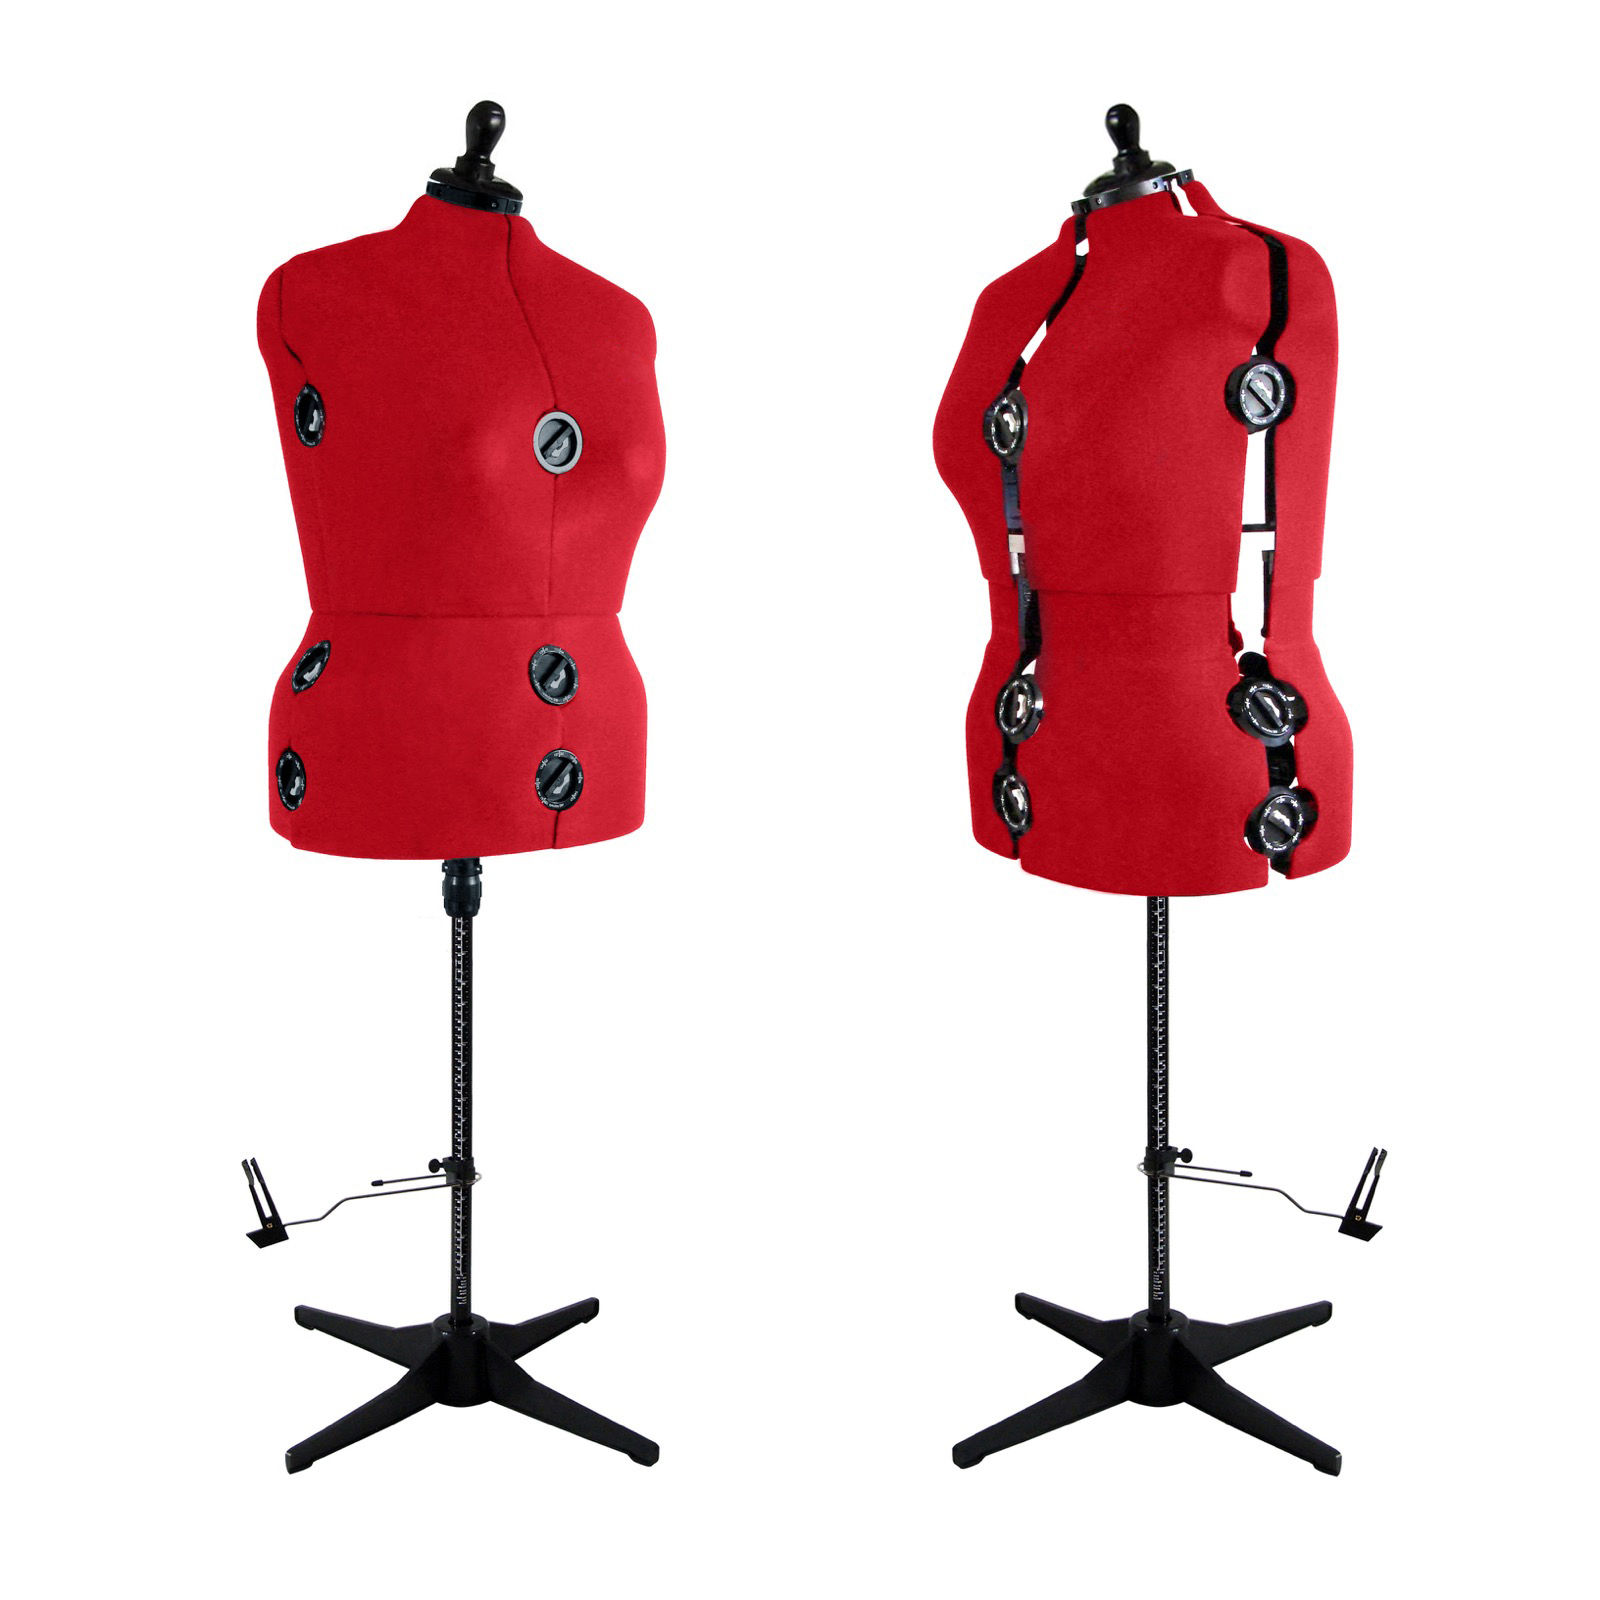 Diana 8-Part Adjustable Dressmaker's Dummy Available in 4 Sizes. 